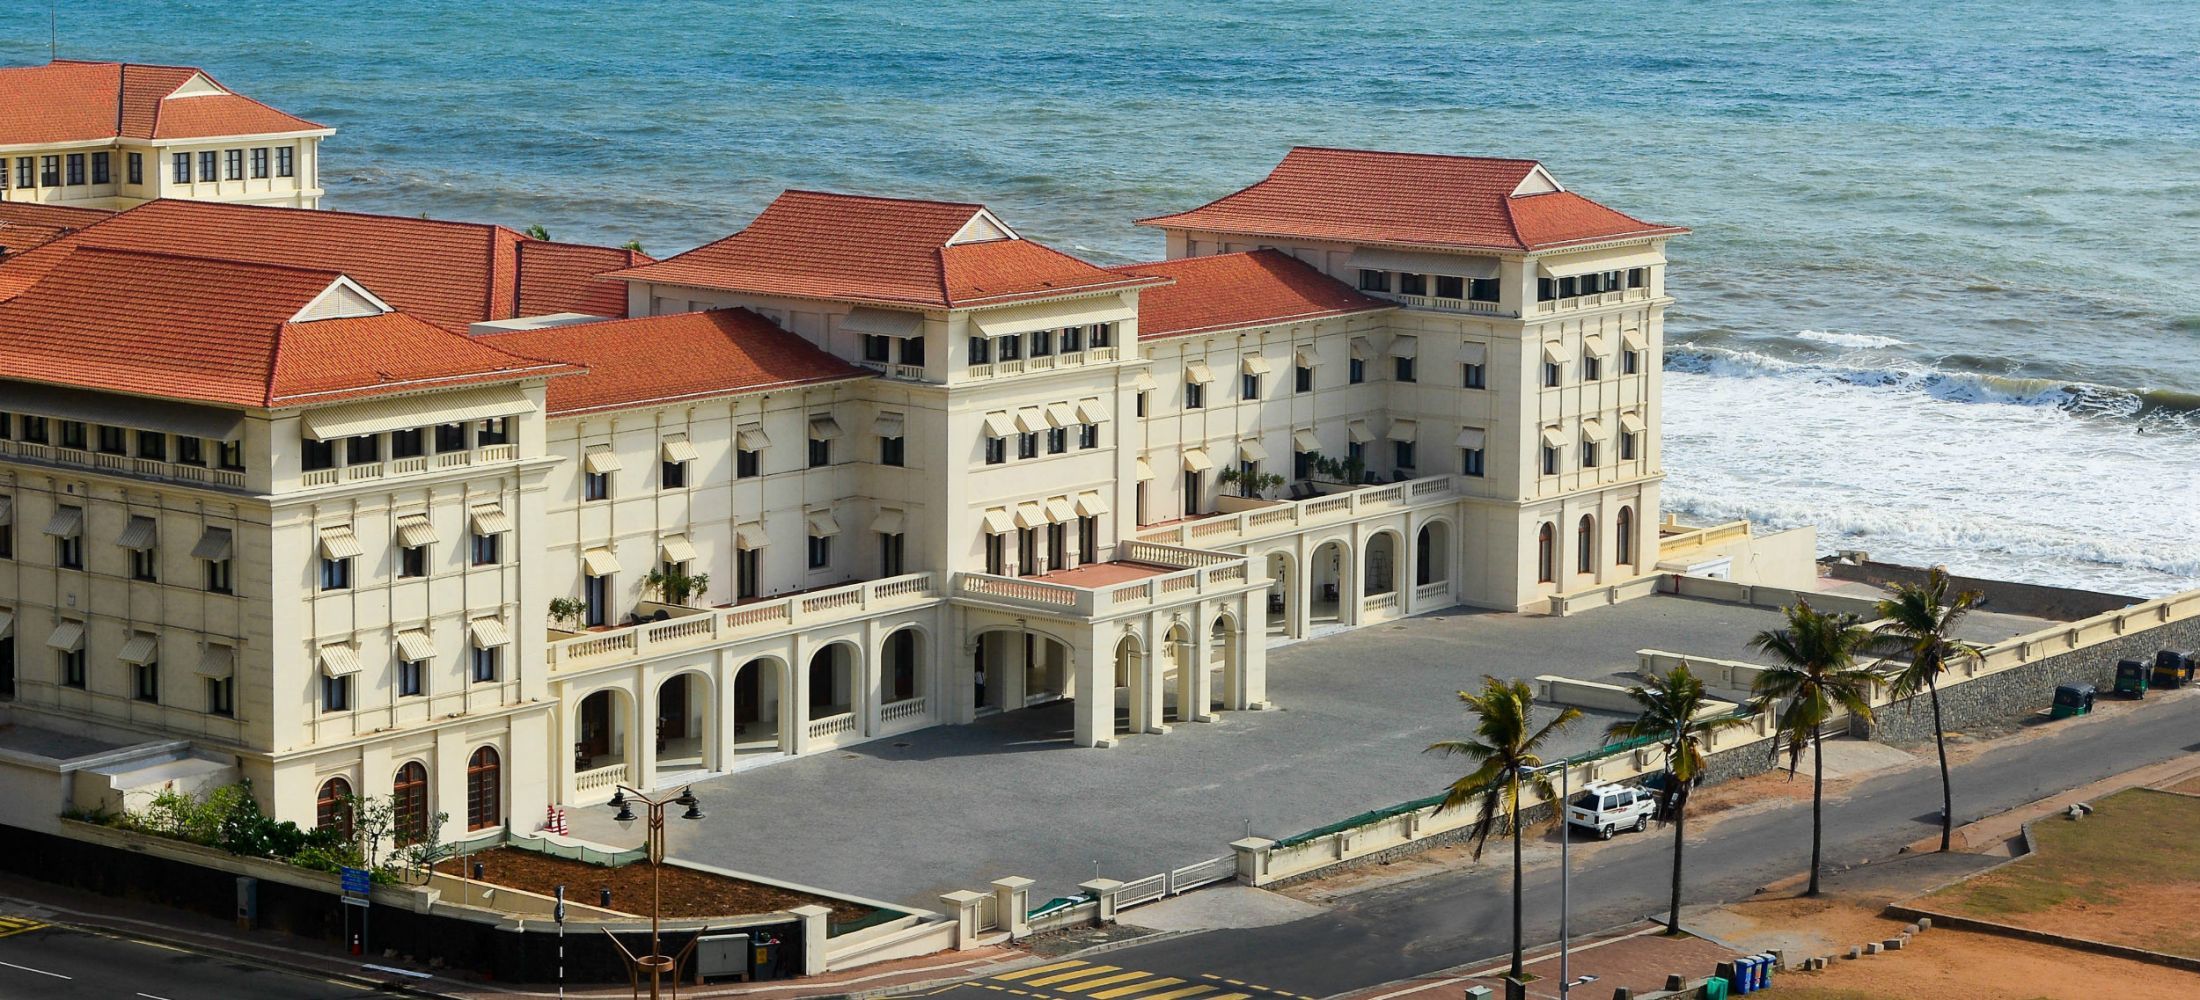 Hotel Front View with beach